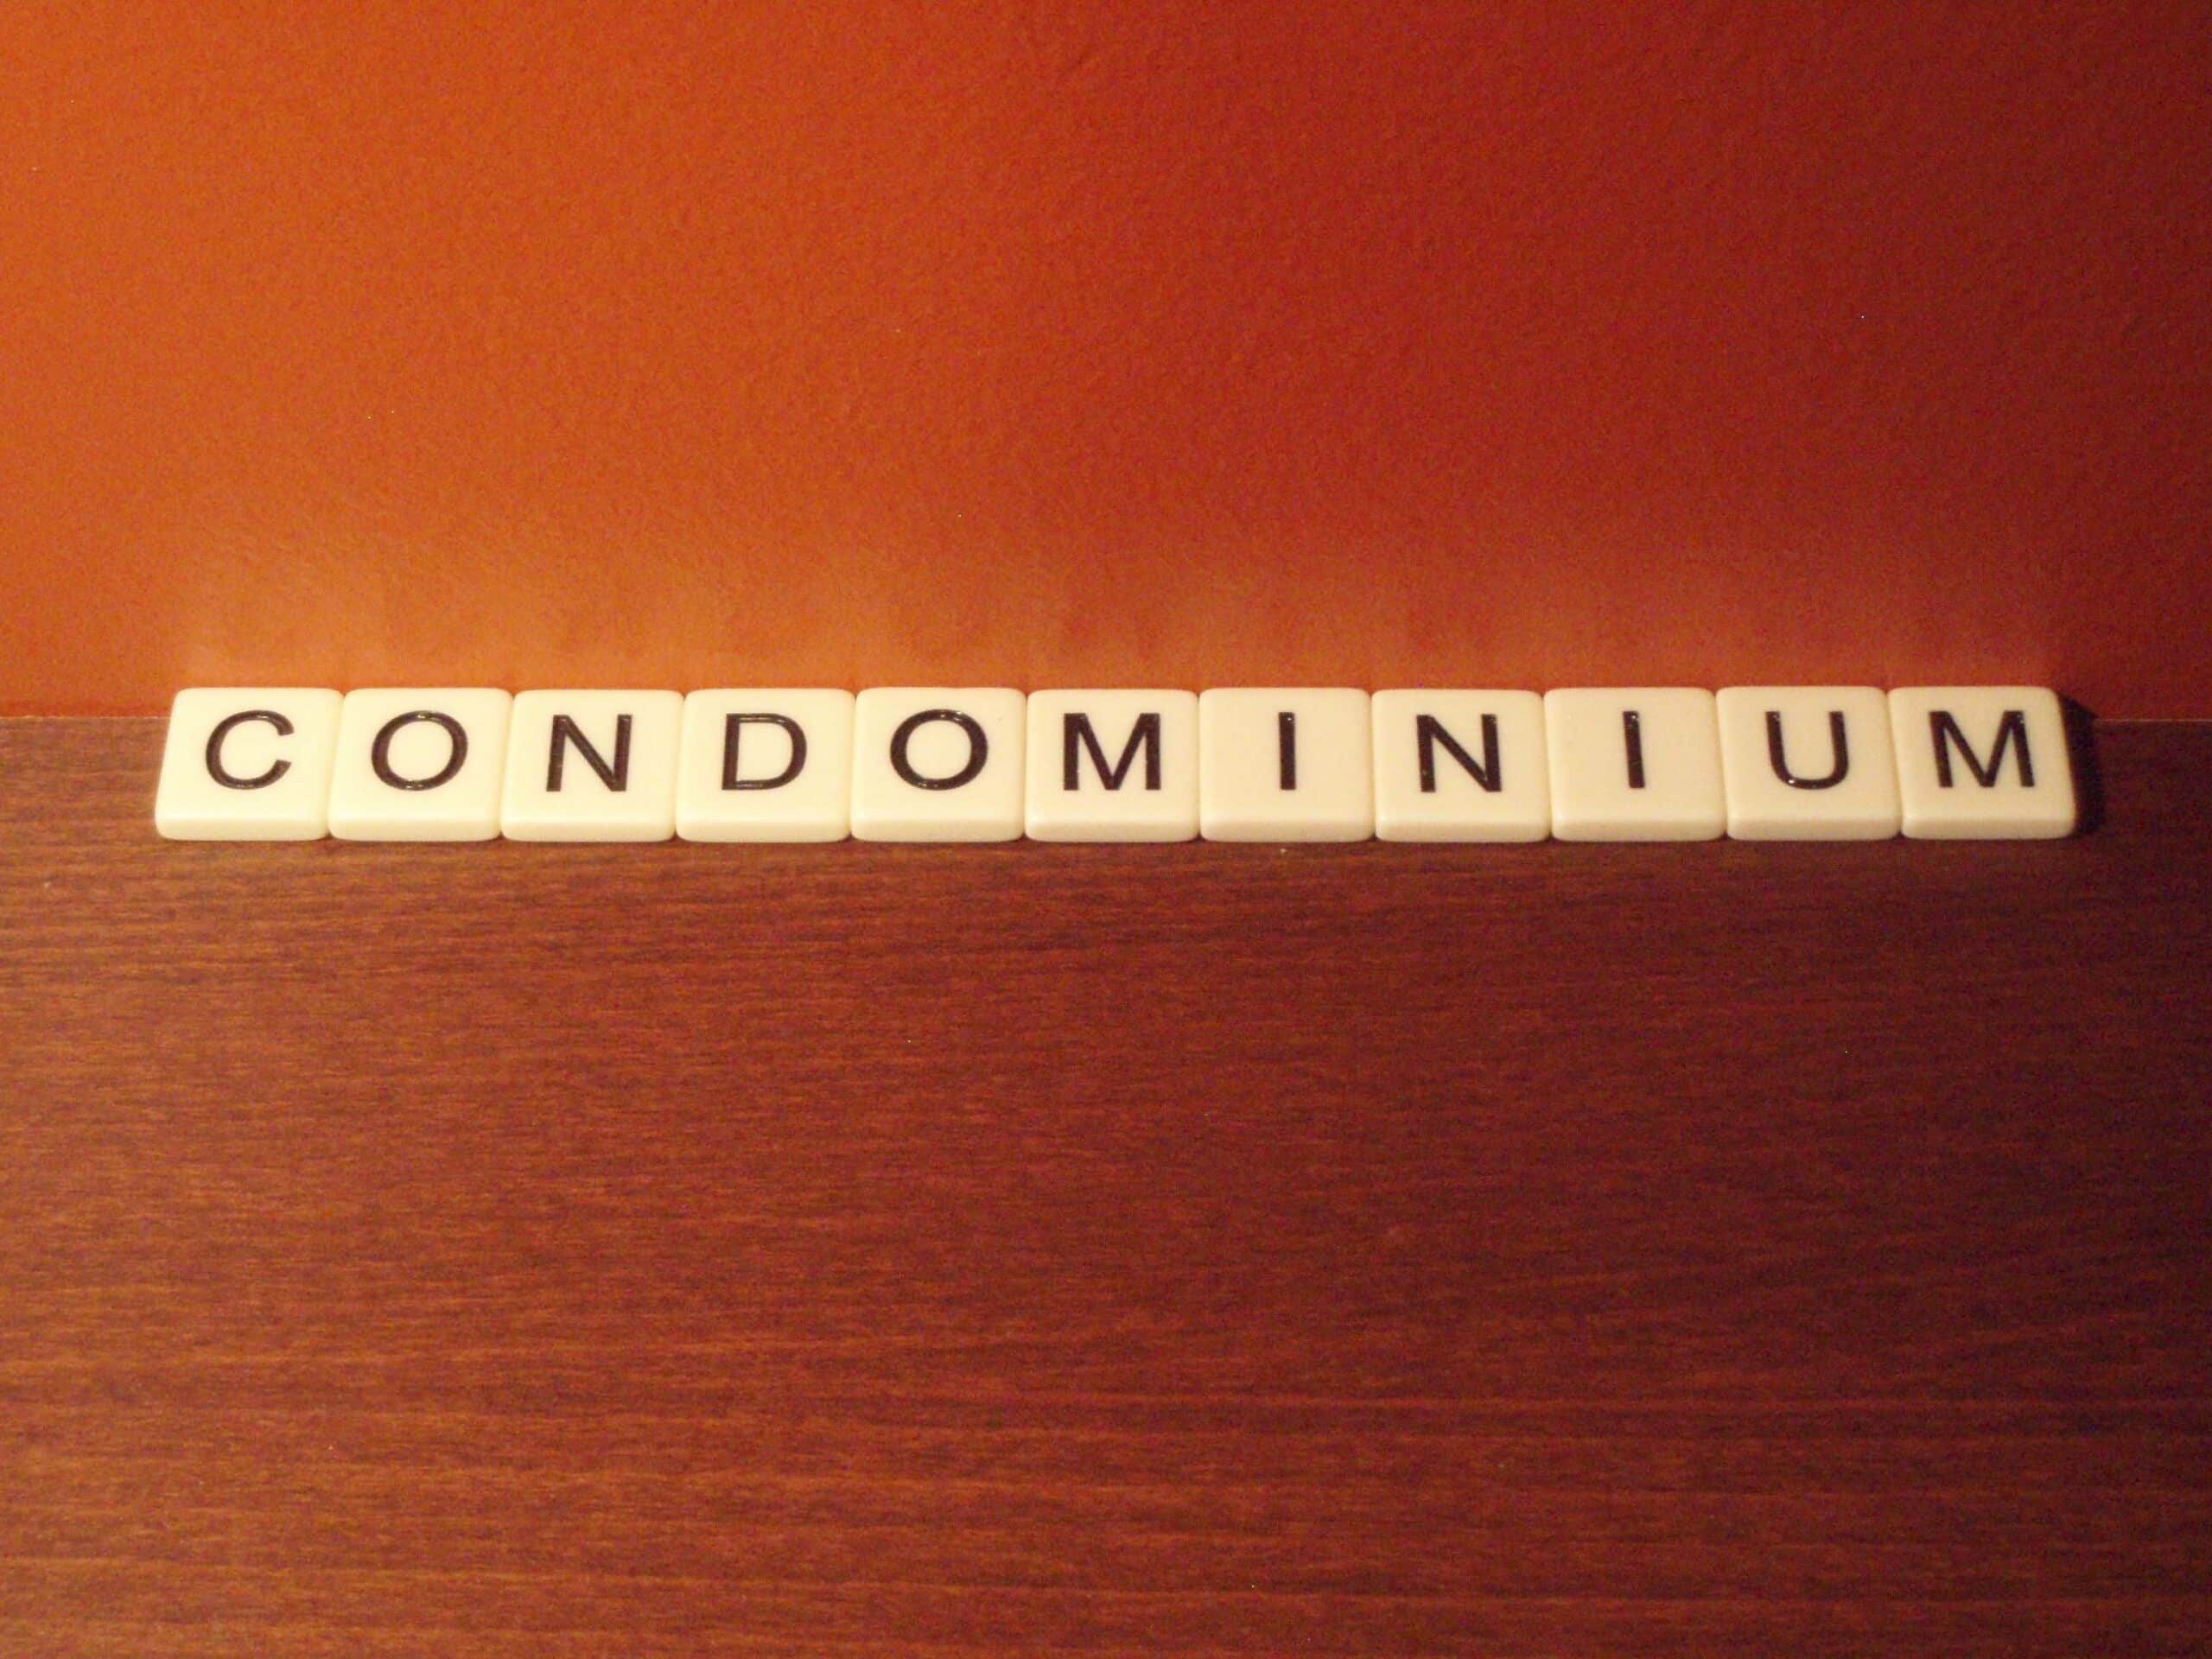 What Exactly Is a Condominium?